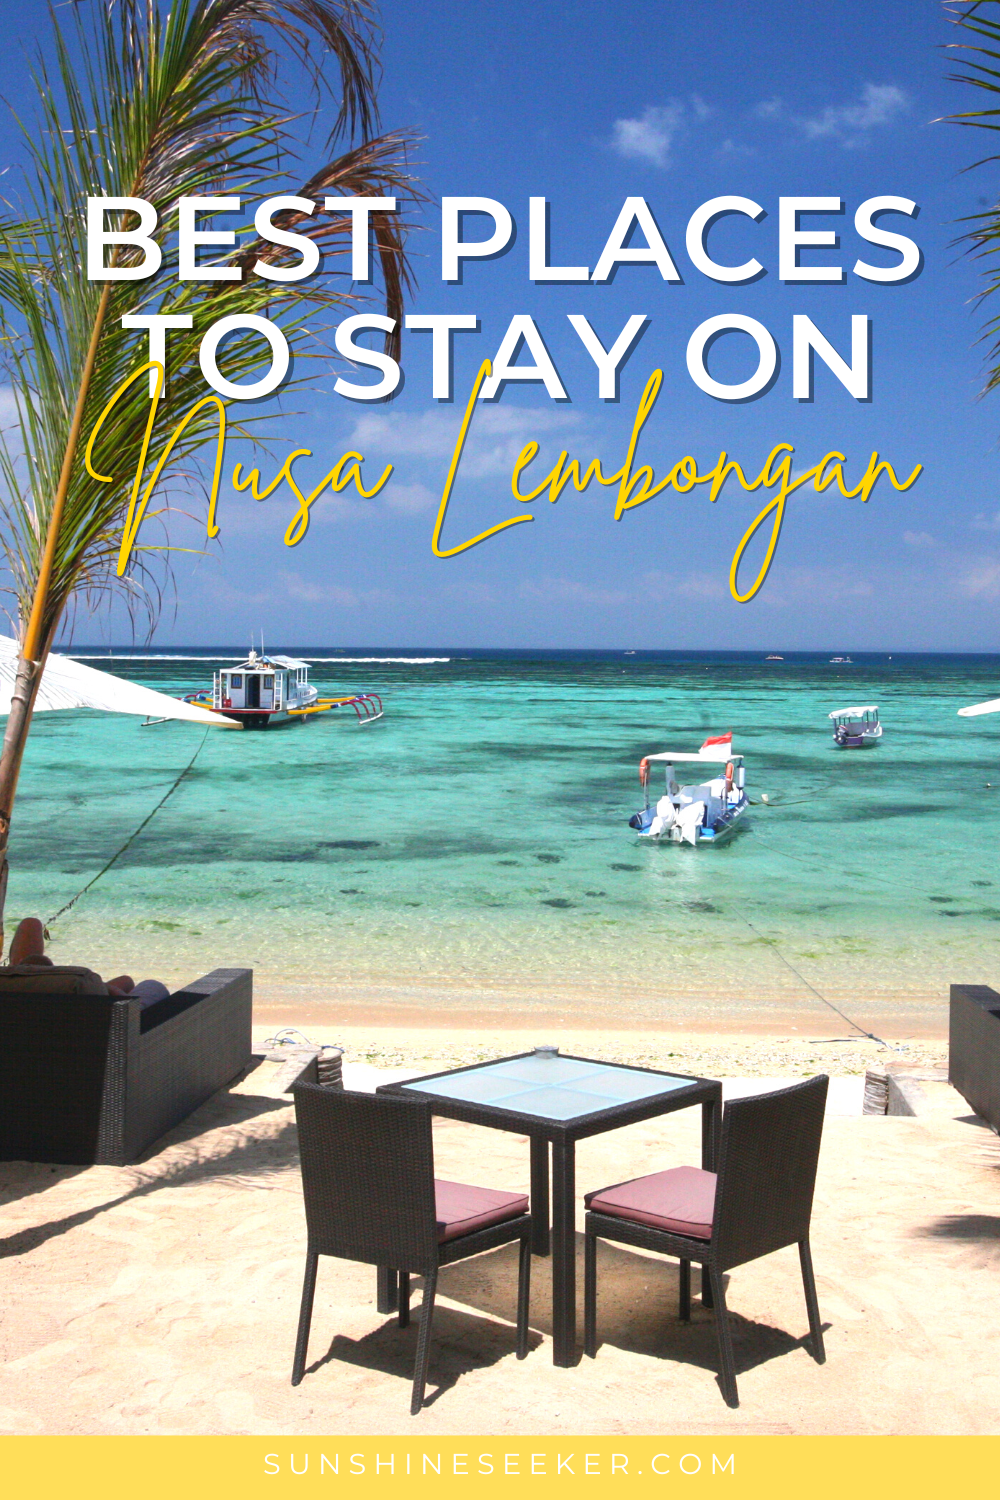 Where to stay on Nusa Lembongan, just off the coast of Bali. Discover all the best areas and places to stay. From budget rooms on the beach to villas with insane views. Nusa Lembongan is paradise.